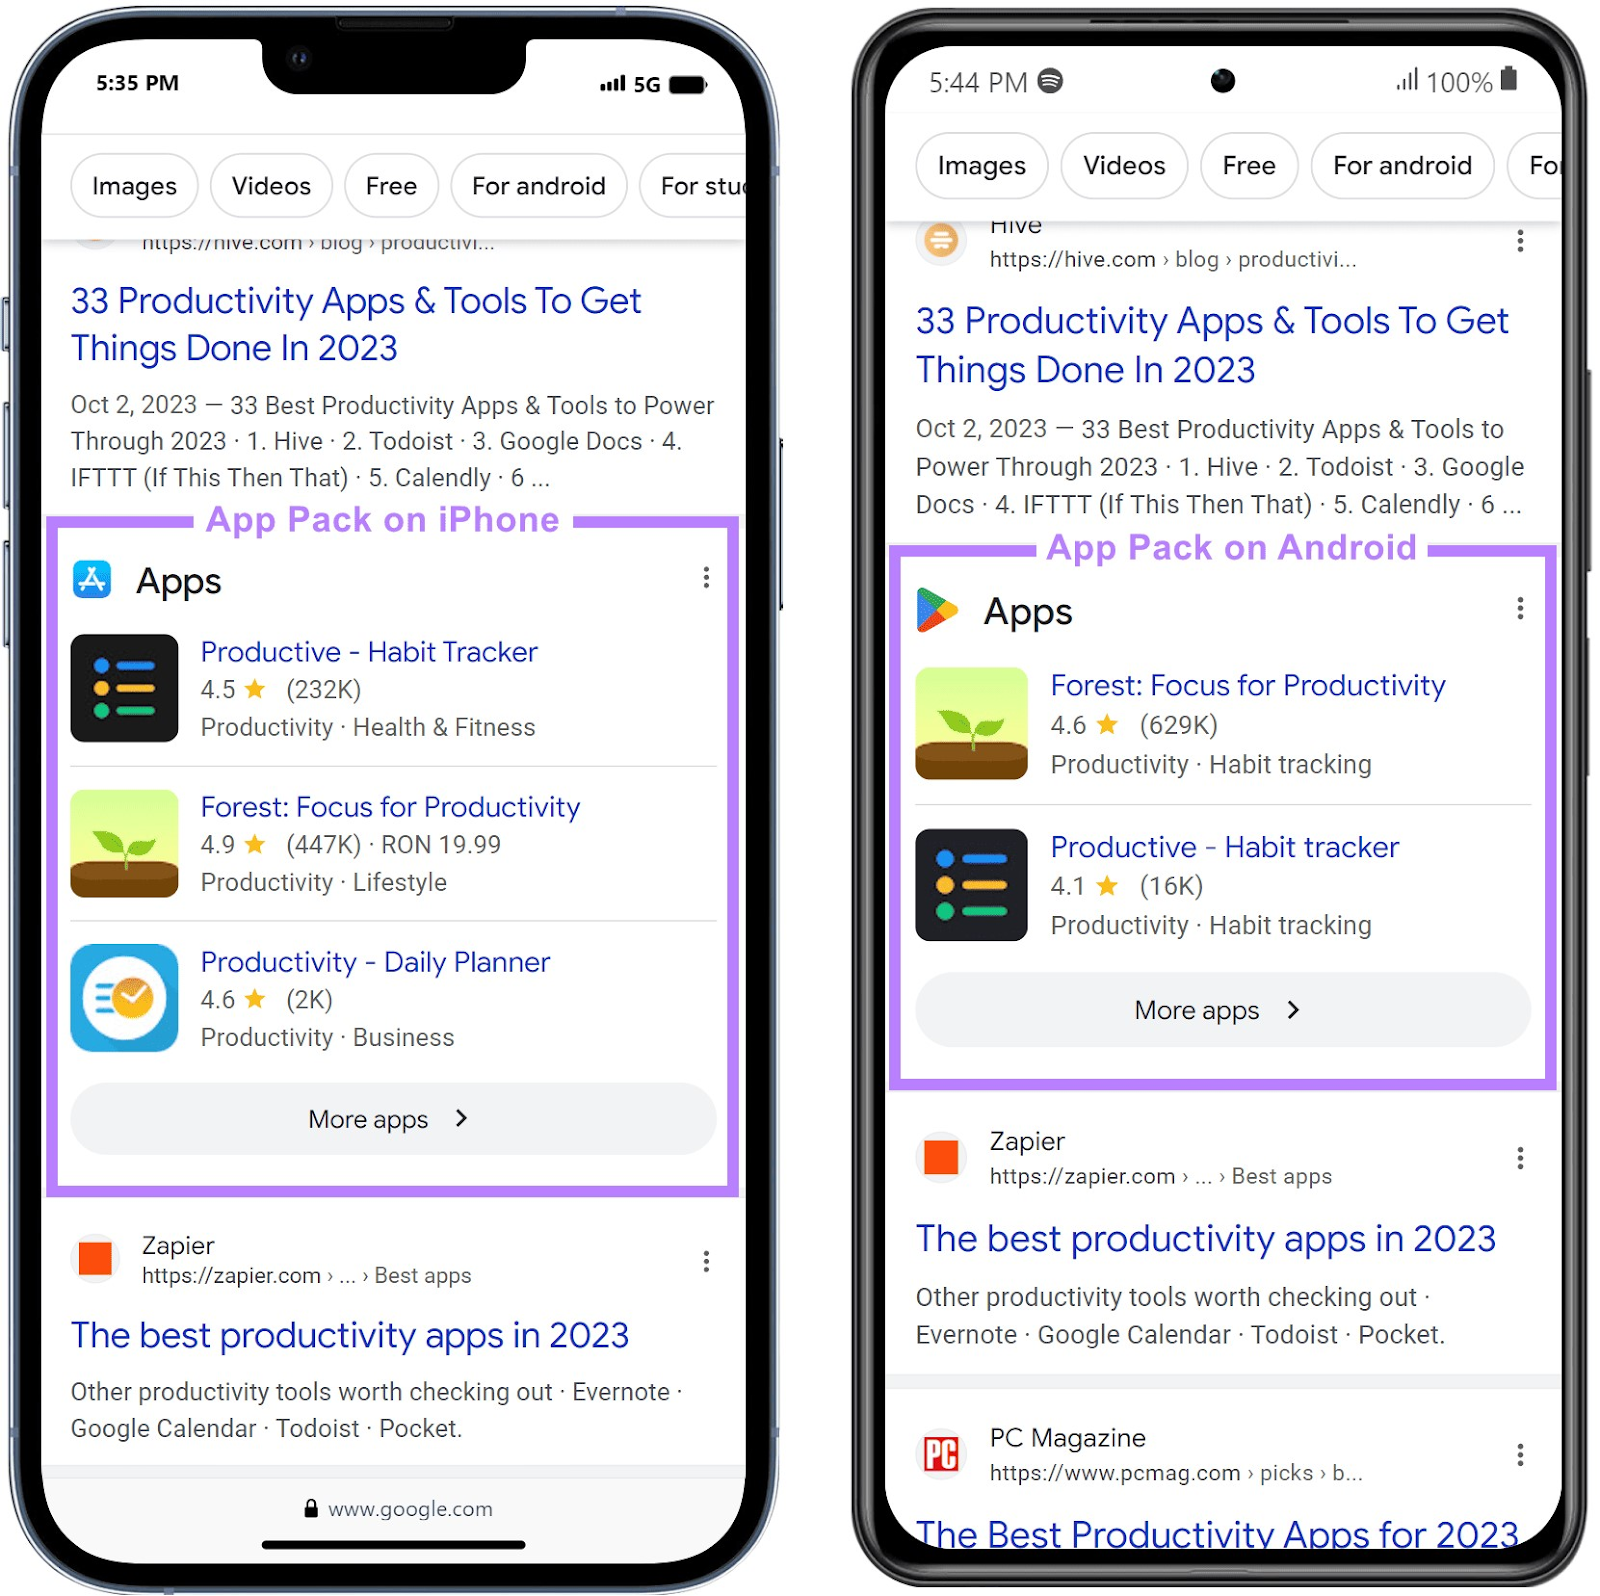 Google’s Mobile SERP: Everything You Need to Know